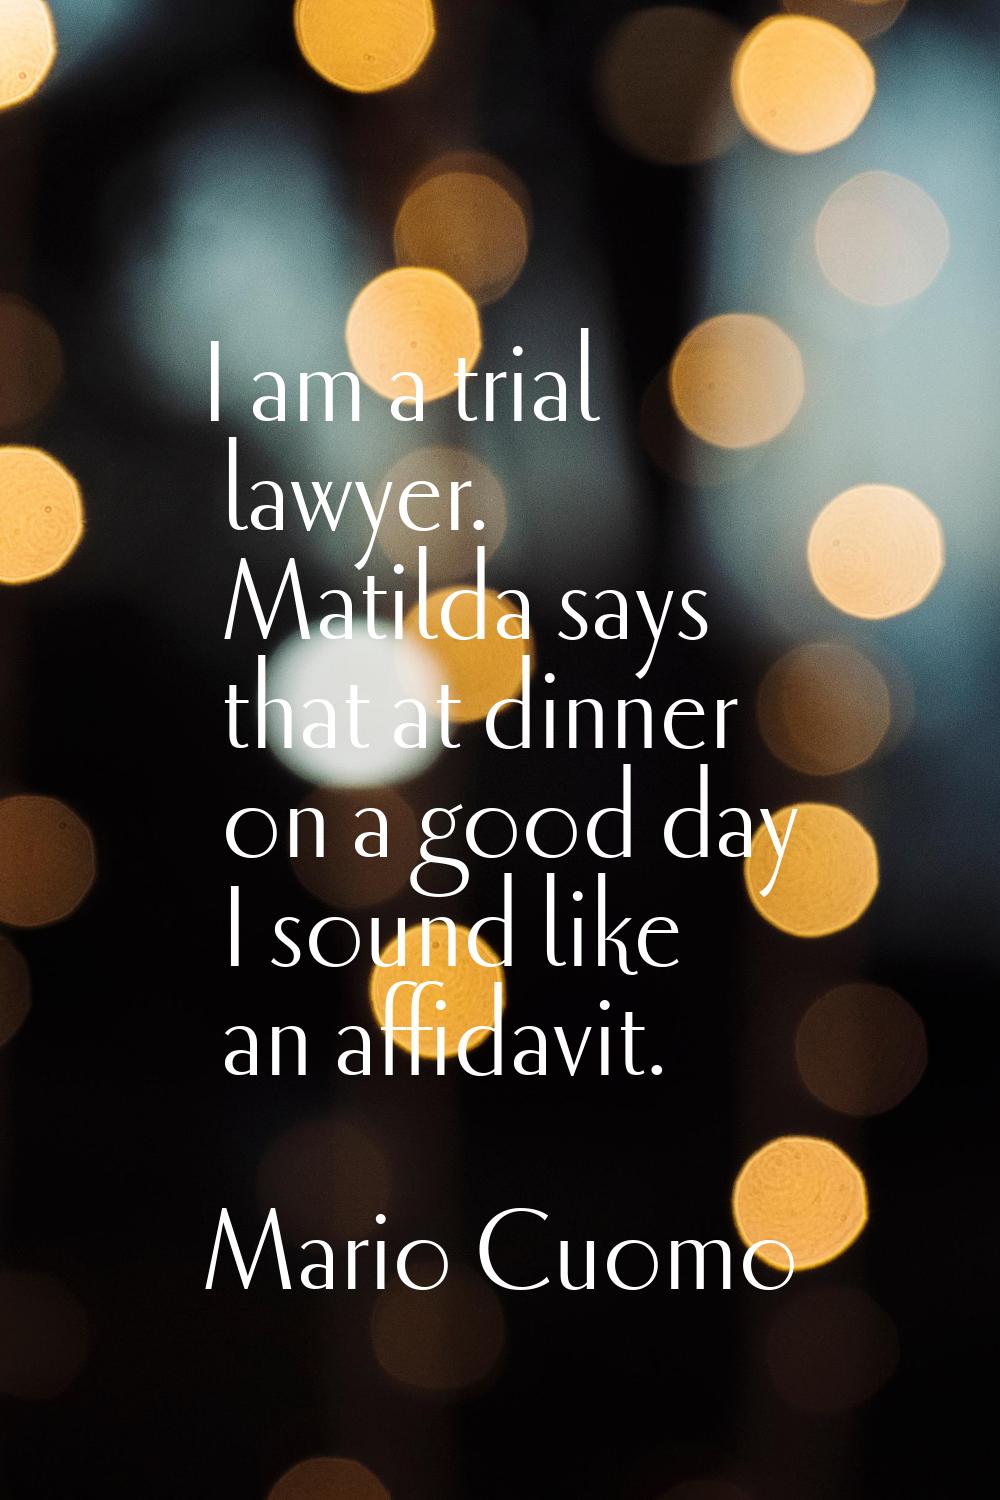 I am a trial lawyer. Matilda says that at dinner on a good day I sound like an affidavit.